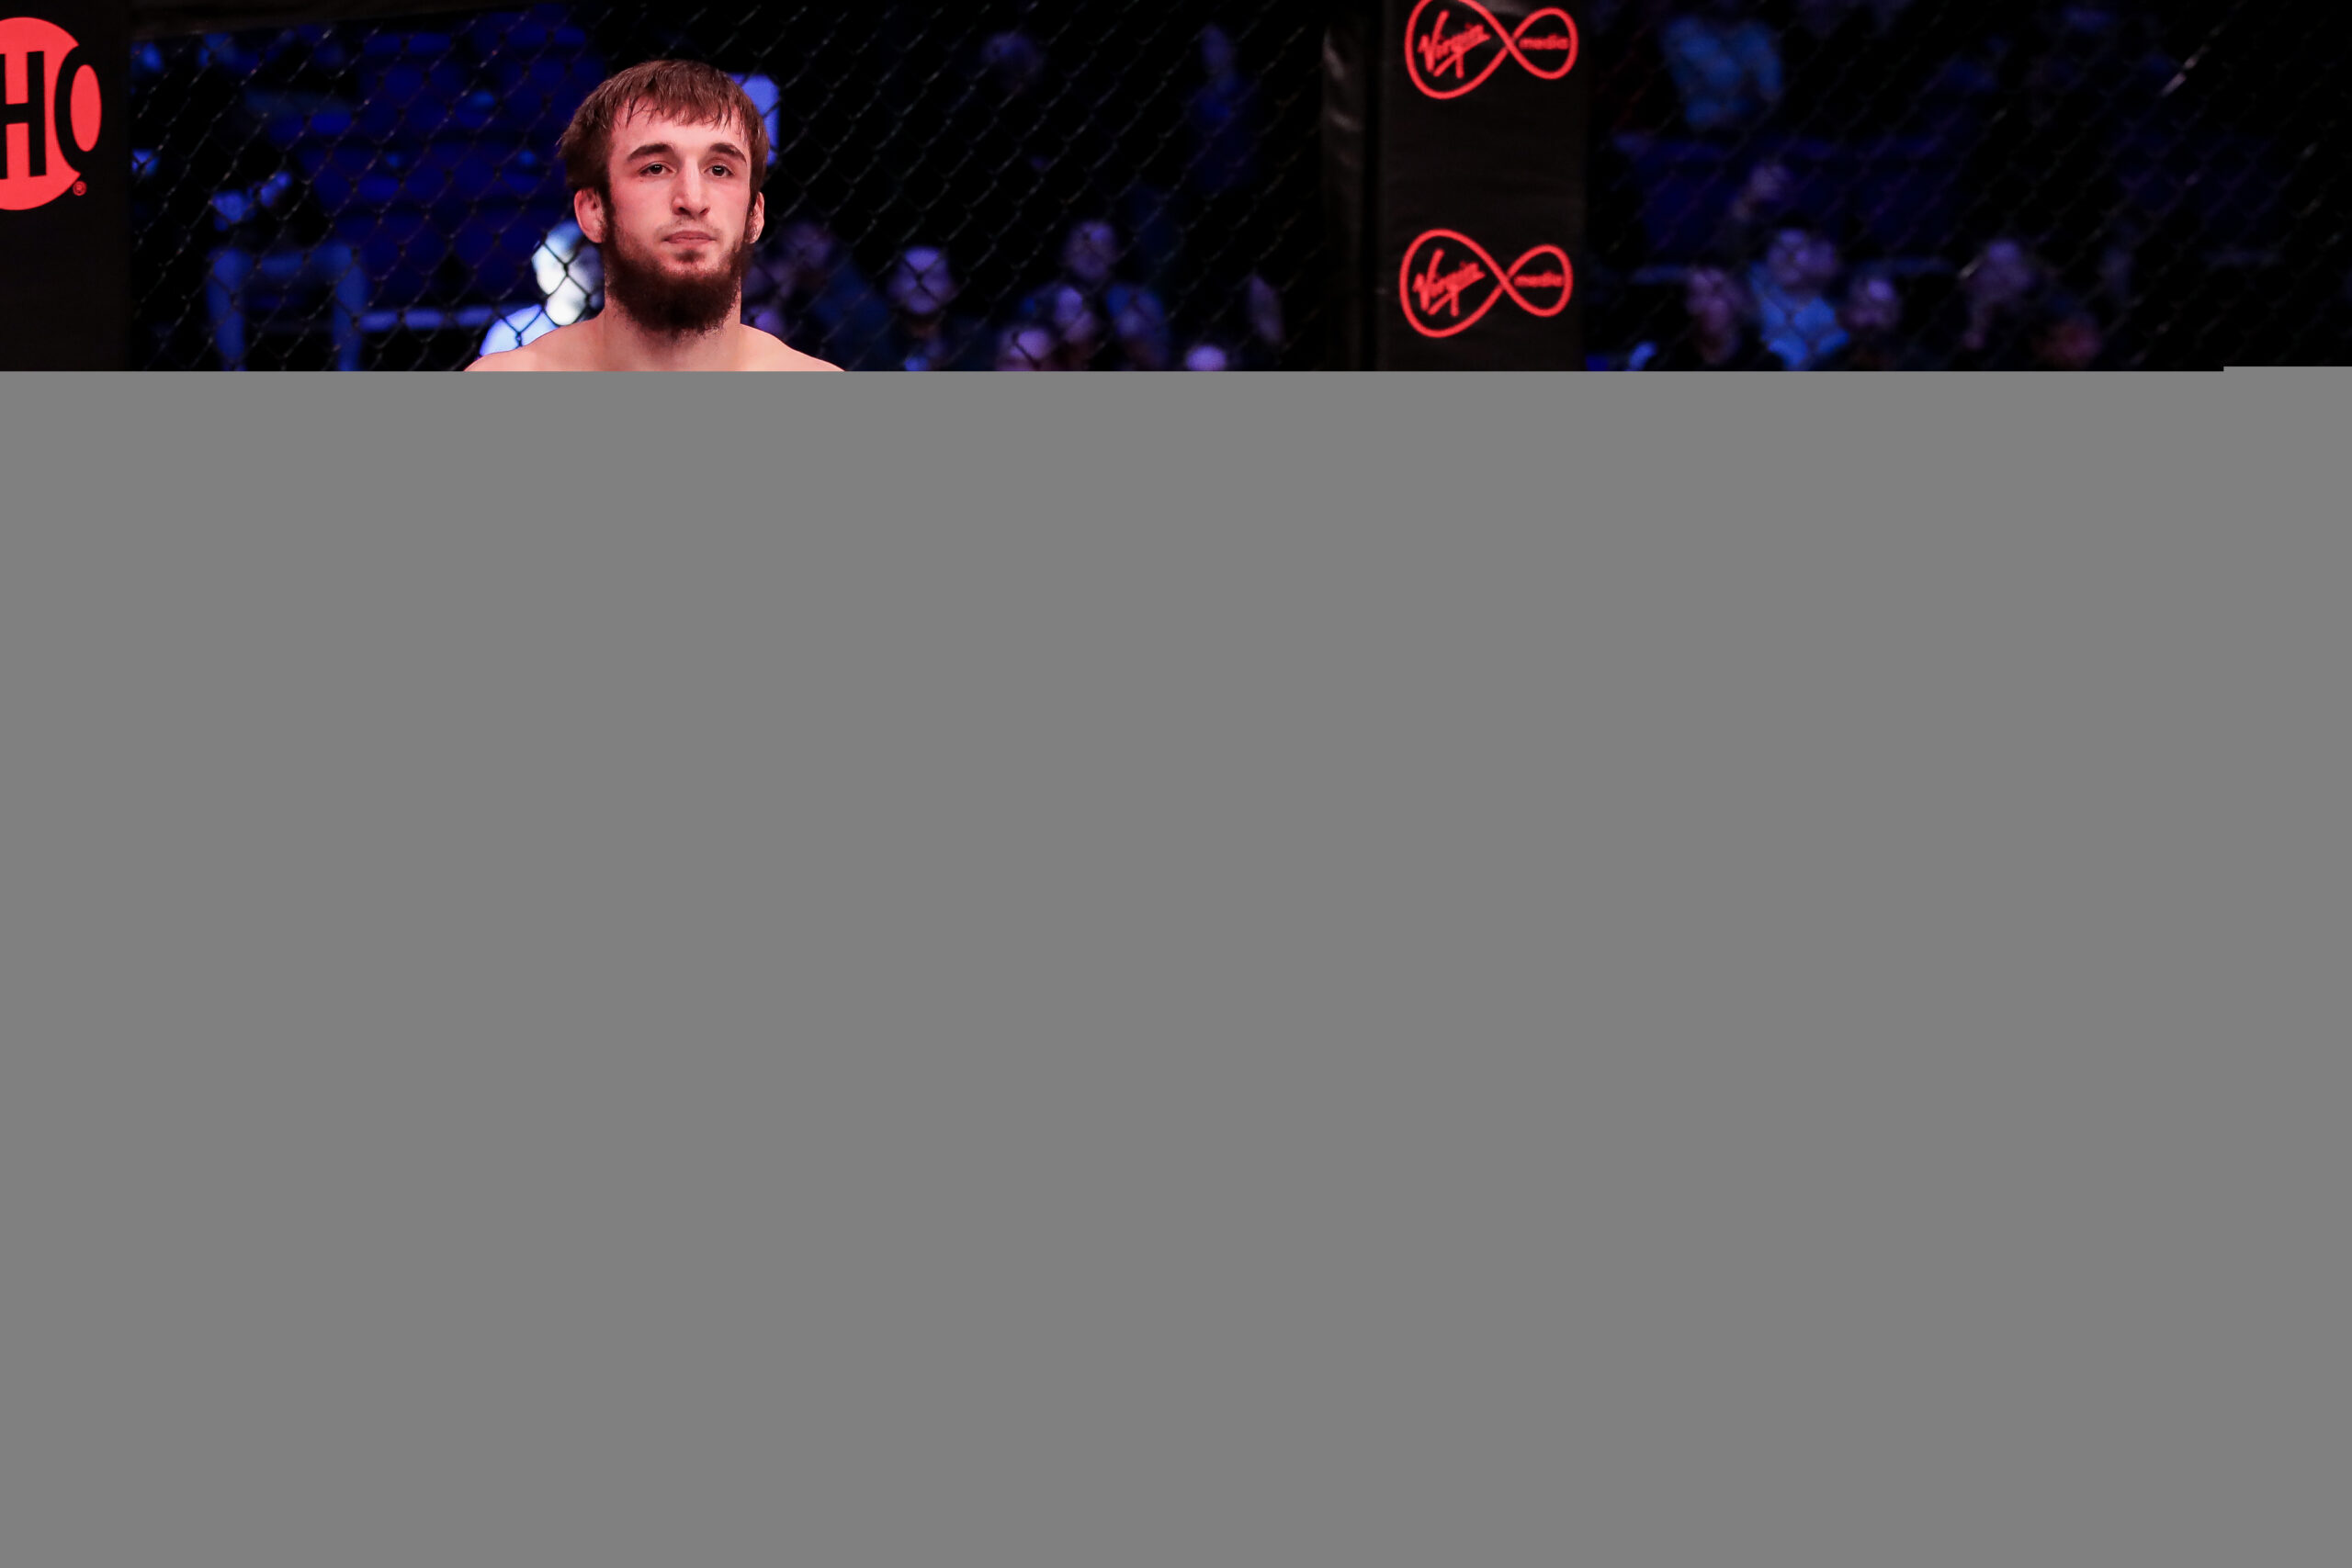 Khasan Magomedsharipov doesn’t see many upcoming threats in Bellator’s featherweight division